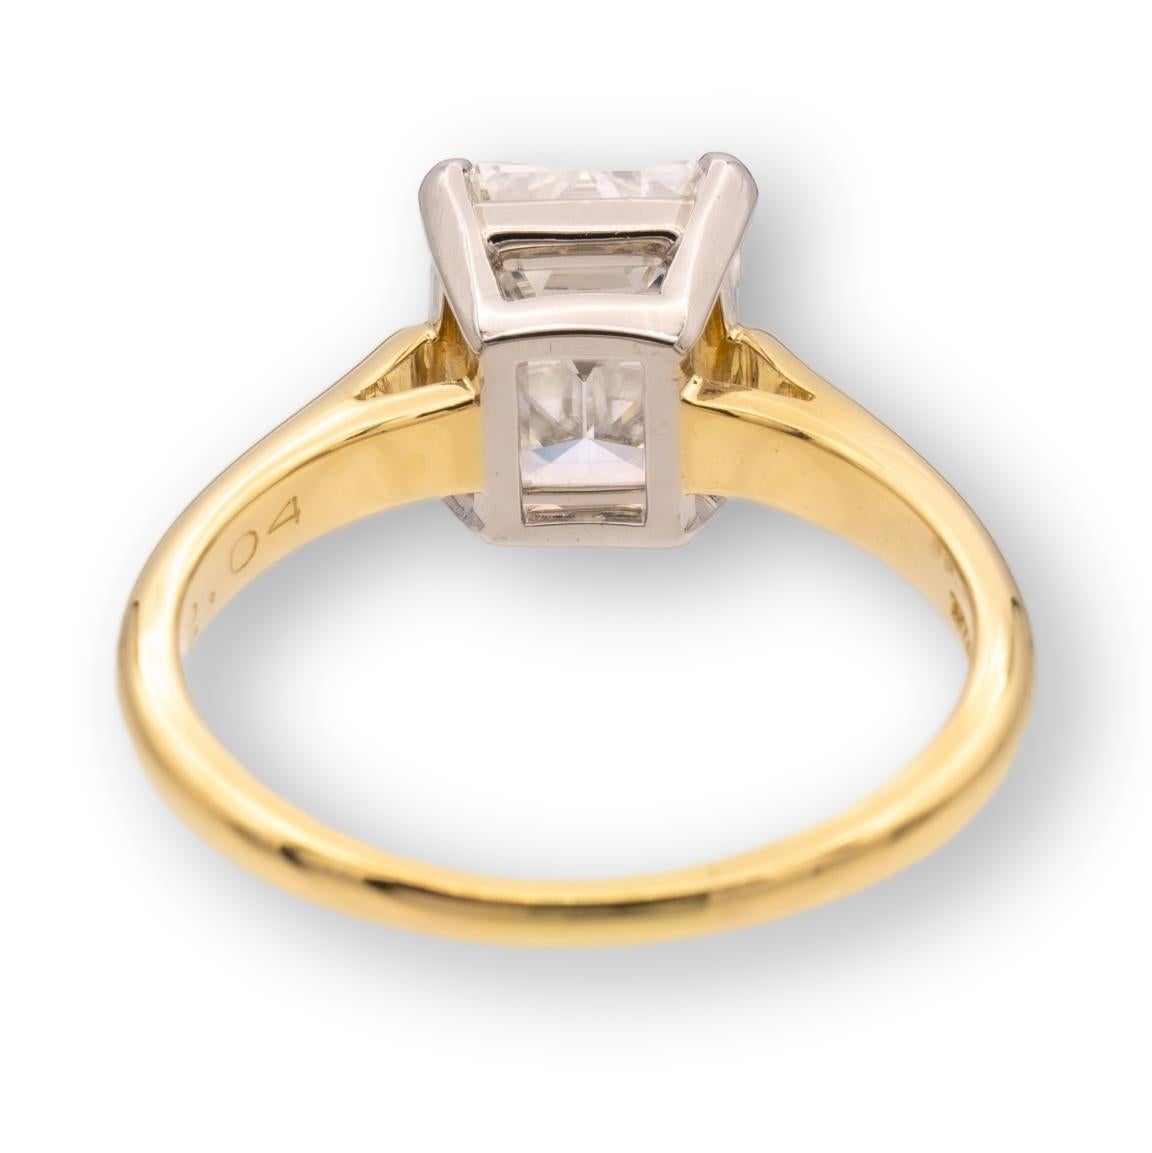 Women's Tiffany & Co. 18KY 2.04ct IVVS2 Emerald Cut Diamond Solitaire Engagement Ring